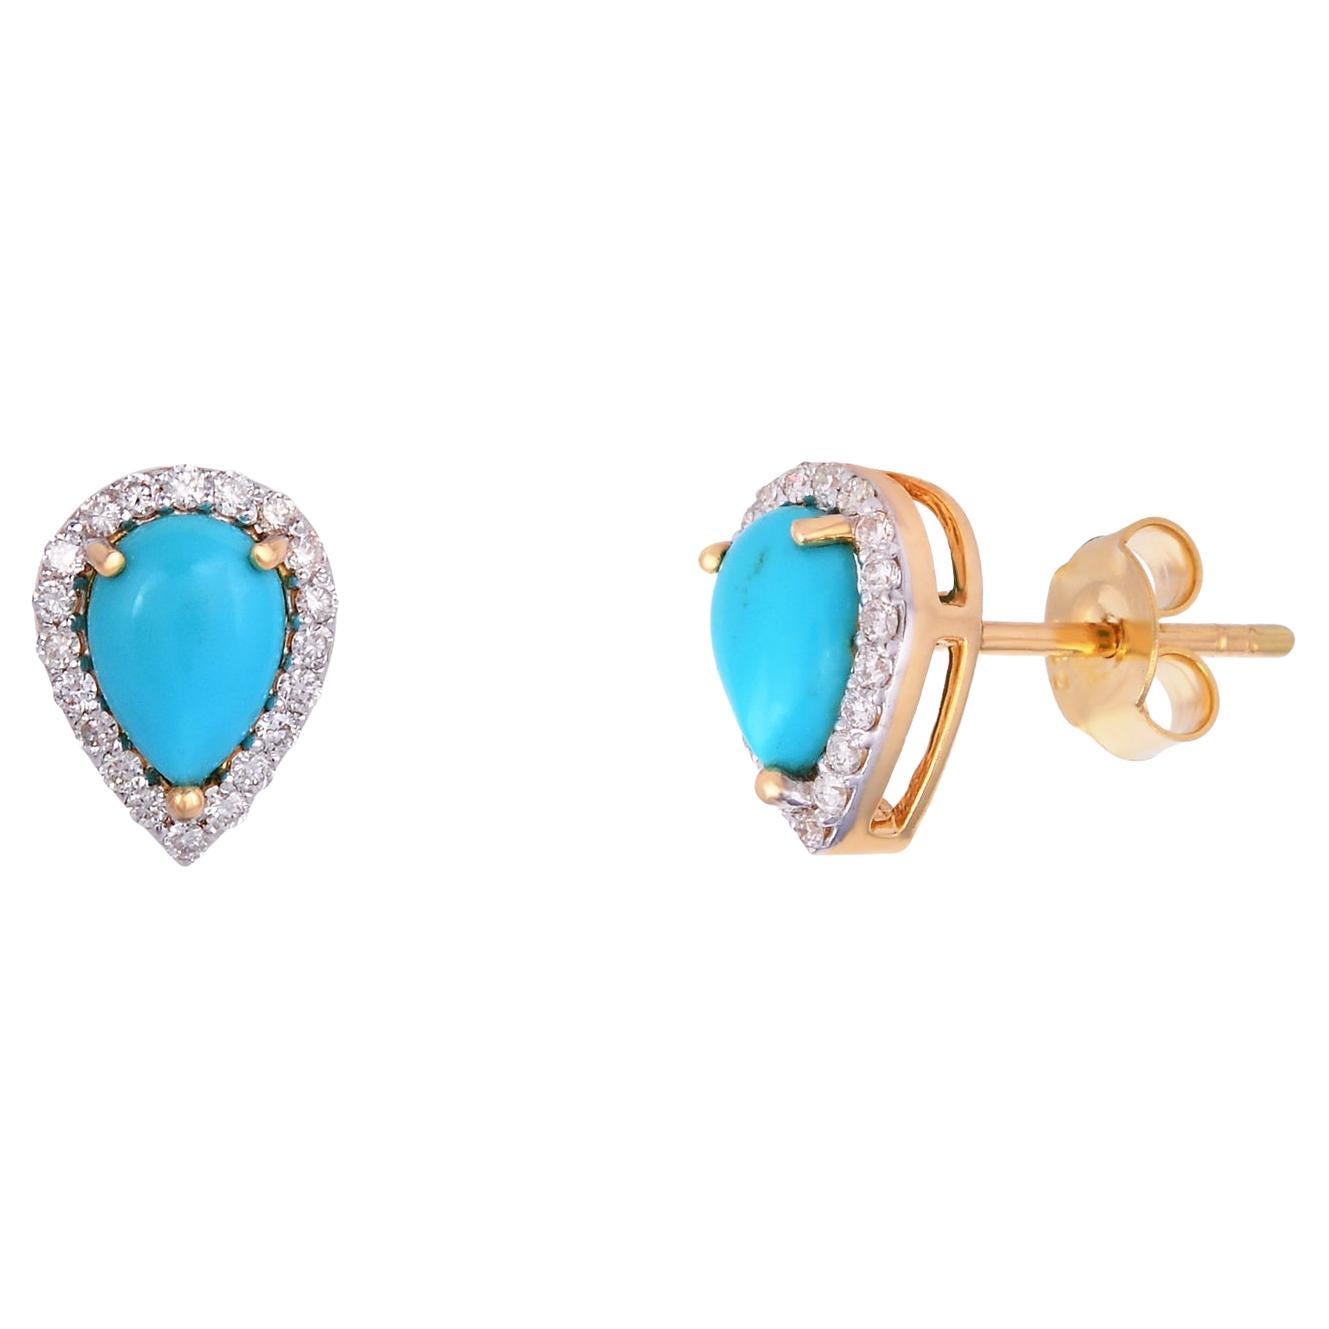 Turquoise Stud Earrings With Diamond in 14Karat Gold For Sale